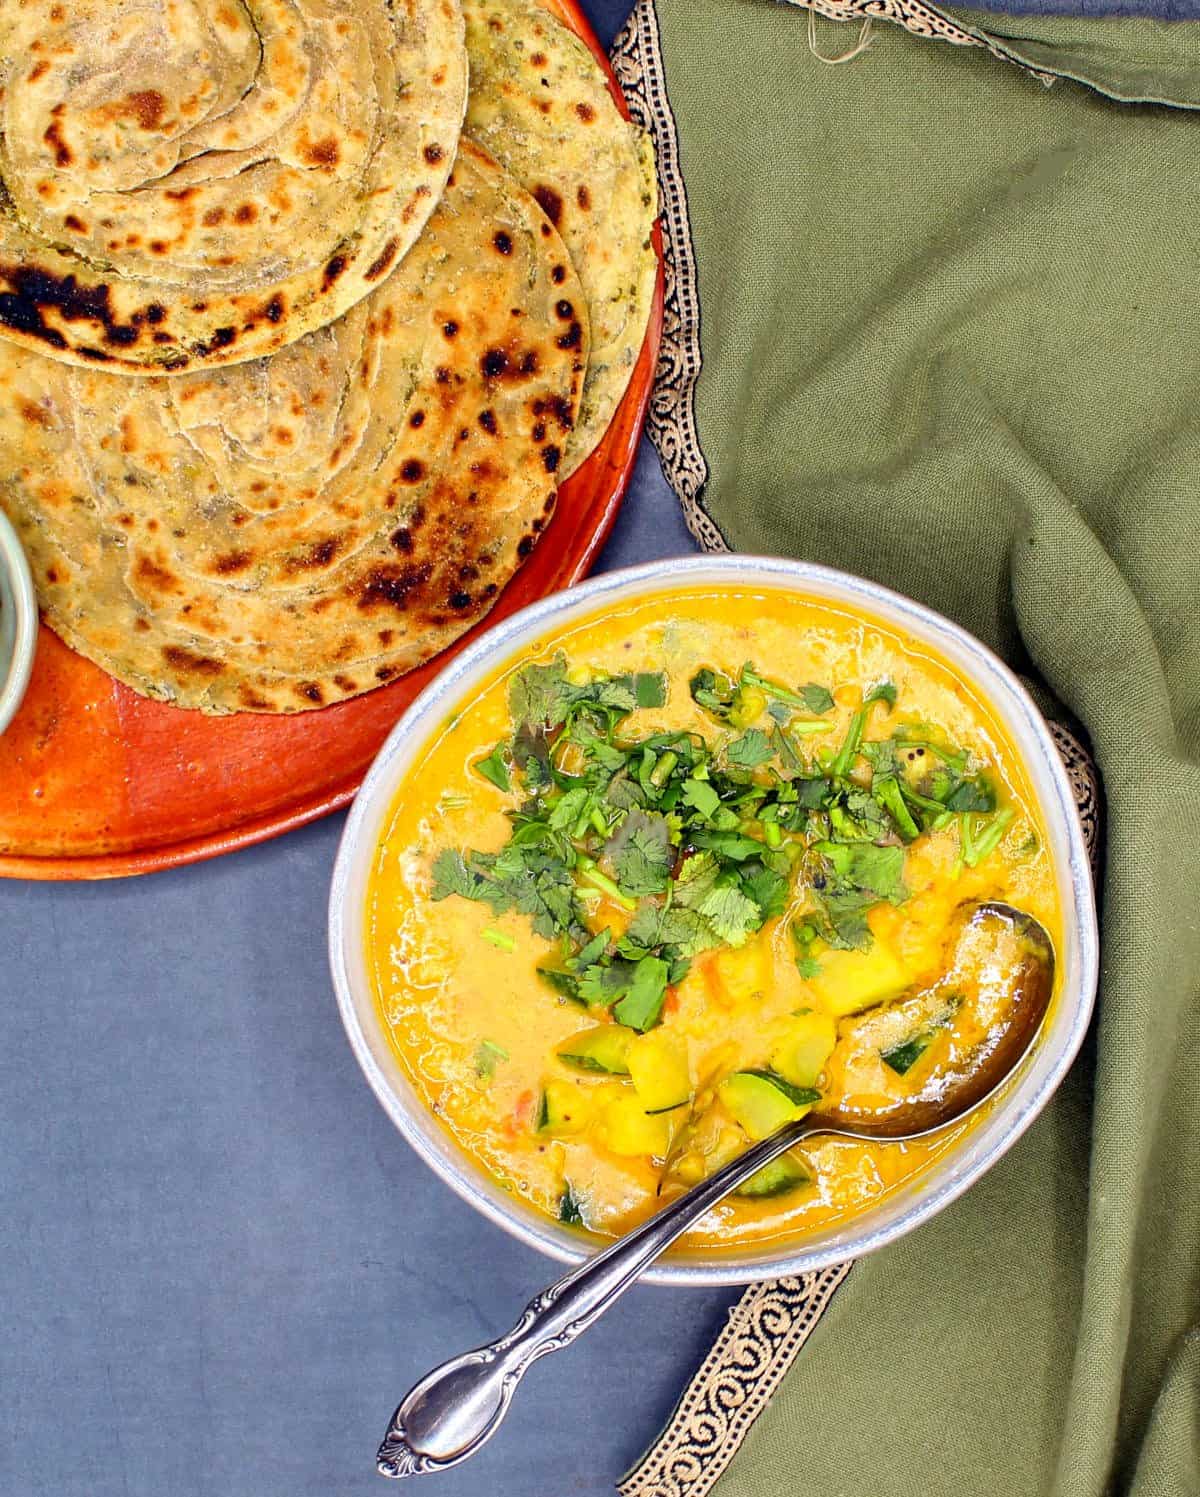 Zucchini dal in bowl with a spoon, cilantro garnish and parathas in background.